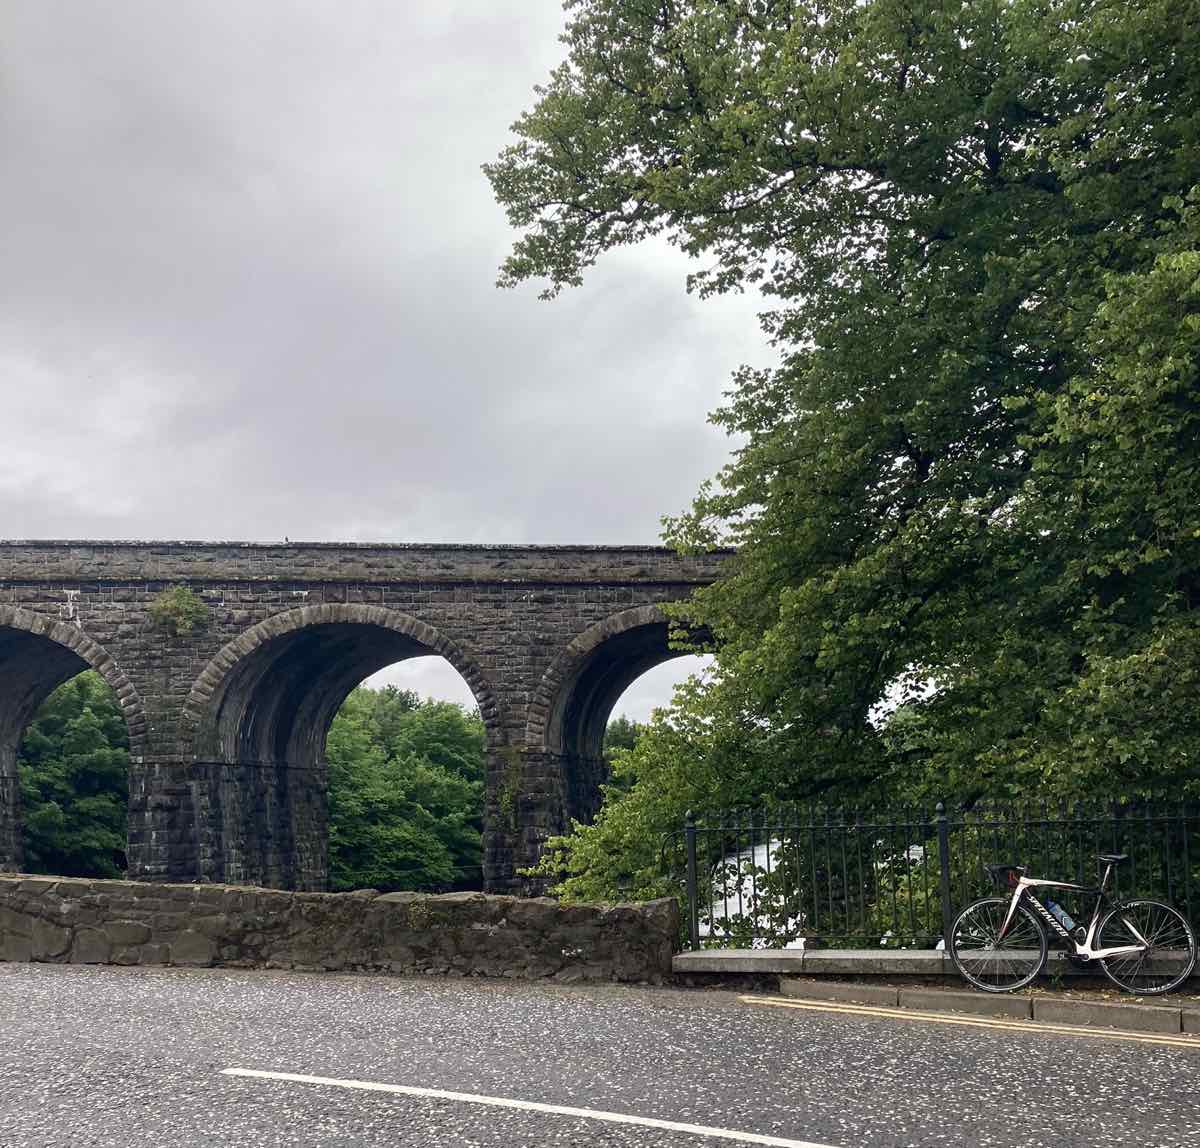 bikerumor pic of the day a road bike leans against a low stone wall the borders the road with a stone arched bridge in the distance. the sky is cloudy and bright.